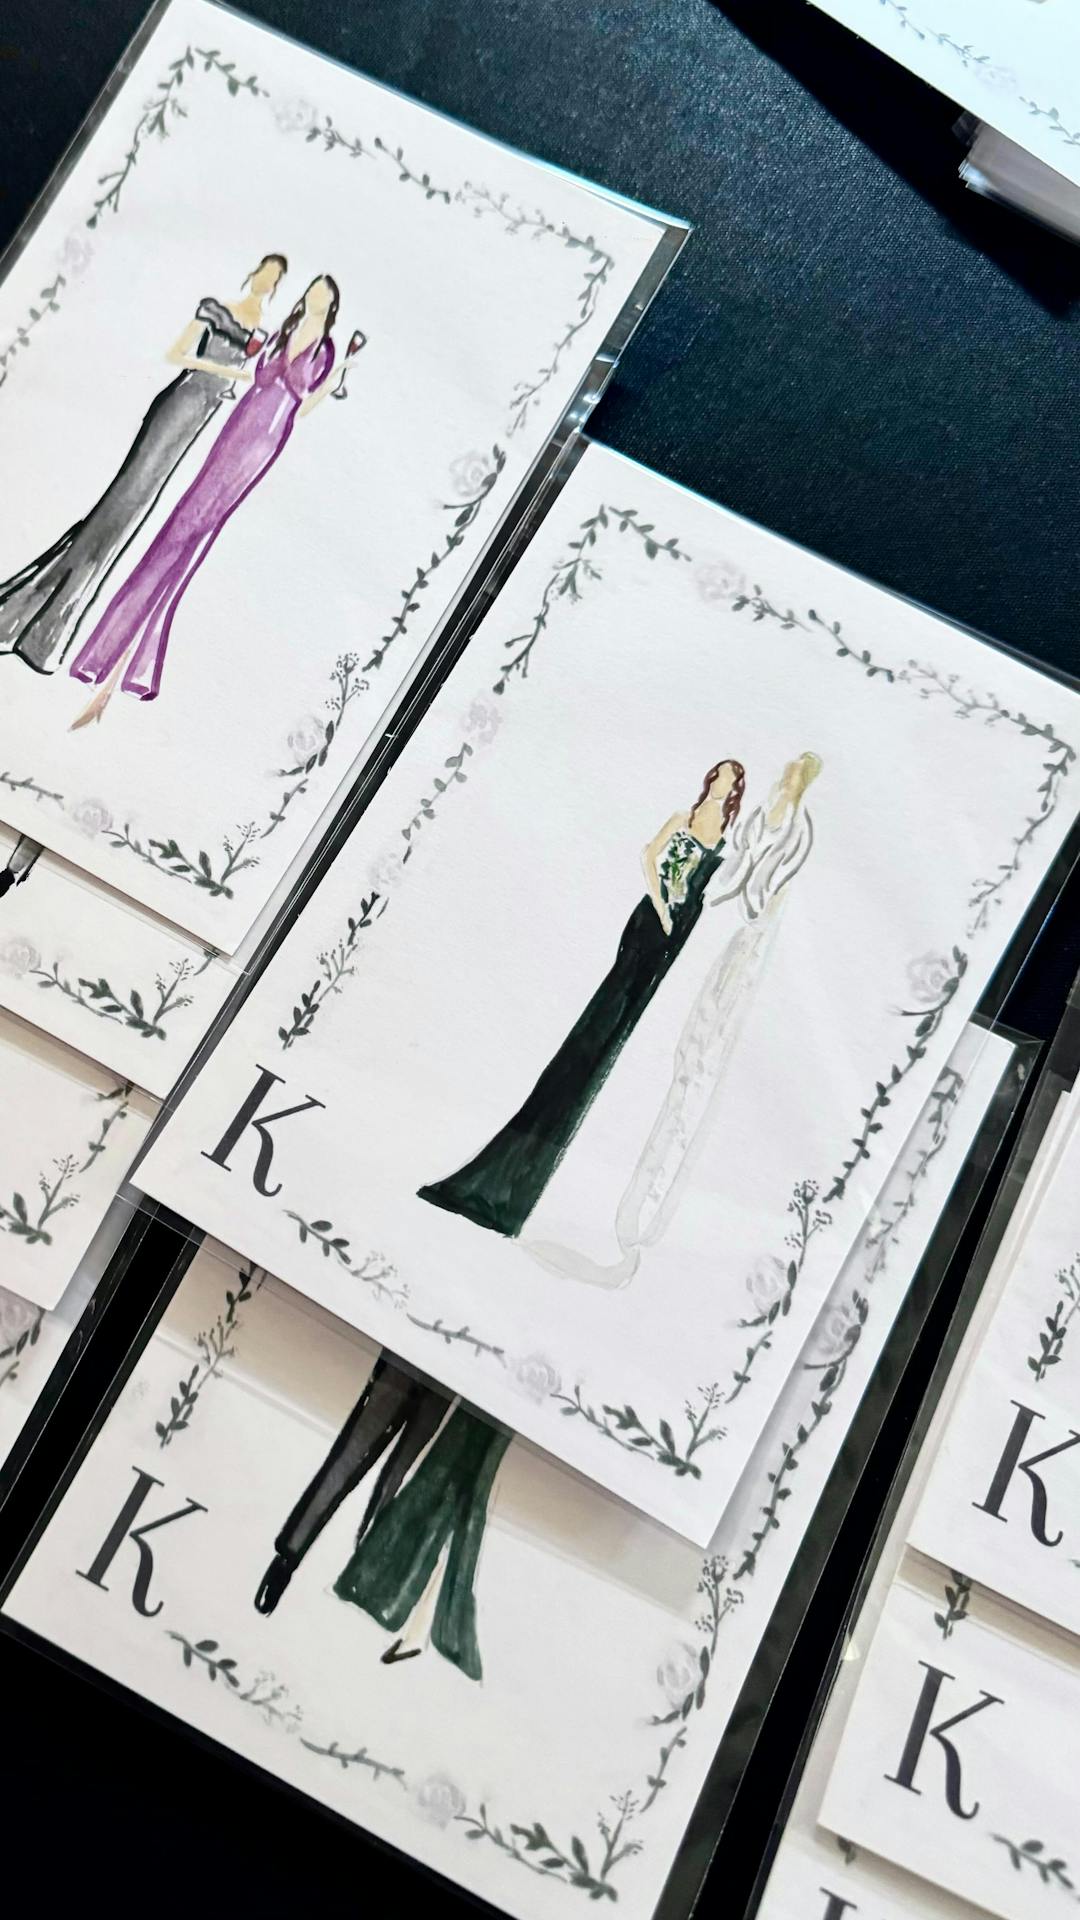 if you’re looking for a unique wedding favor, look no further than these unique guest paintings 😍 here’s how it works:

1. your picture is taken
2. a sketch is made based on the photo
3. the sketch is colored in with paint
4. your painting is ready to be picked up in about 10 minutes!

it’s so fun to see all of the different outfits on a mini painting, and guests get to take home a memorable keepsake from your special day 💖 

couple: @kmcguig @kennykop5 
venue: The Downtown Club @cescaphe
guest painter: @alliepaintslove
wedding content creator: @vividmomentswithsan 

#weddingcontentcreator #philadelphiaweddingcontentcreator #phillyweddingcontentcreator #phillywedding #philadelphiawedding #weddingfavors #uniqueweddingfavors #livepainter 
keywords: wedding content creator in Philadelphia PA live painter guest paintings portraits unique wedding favors